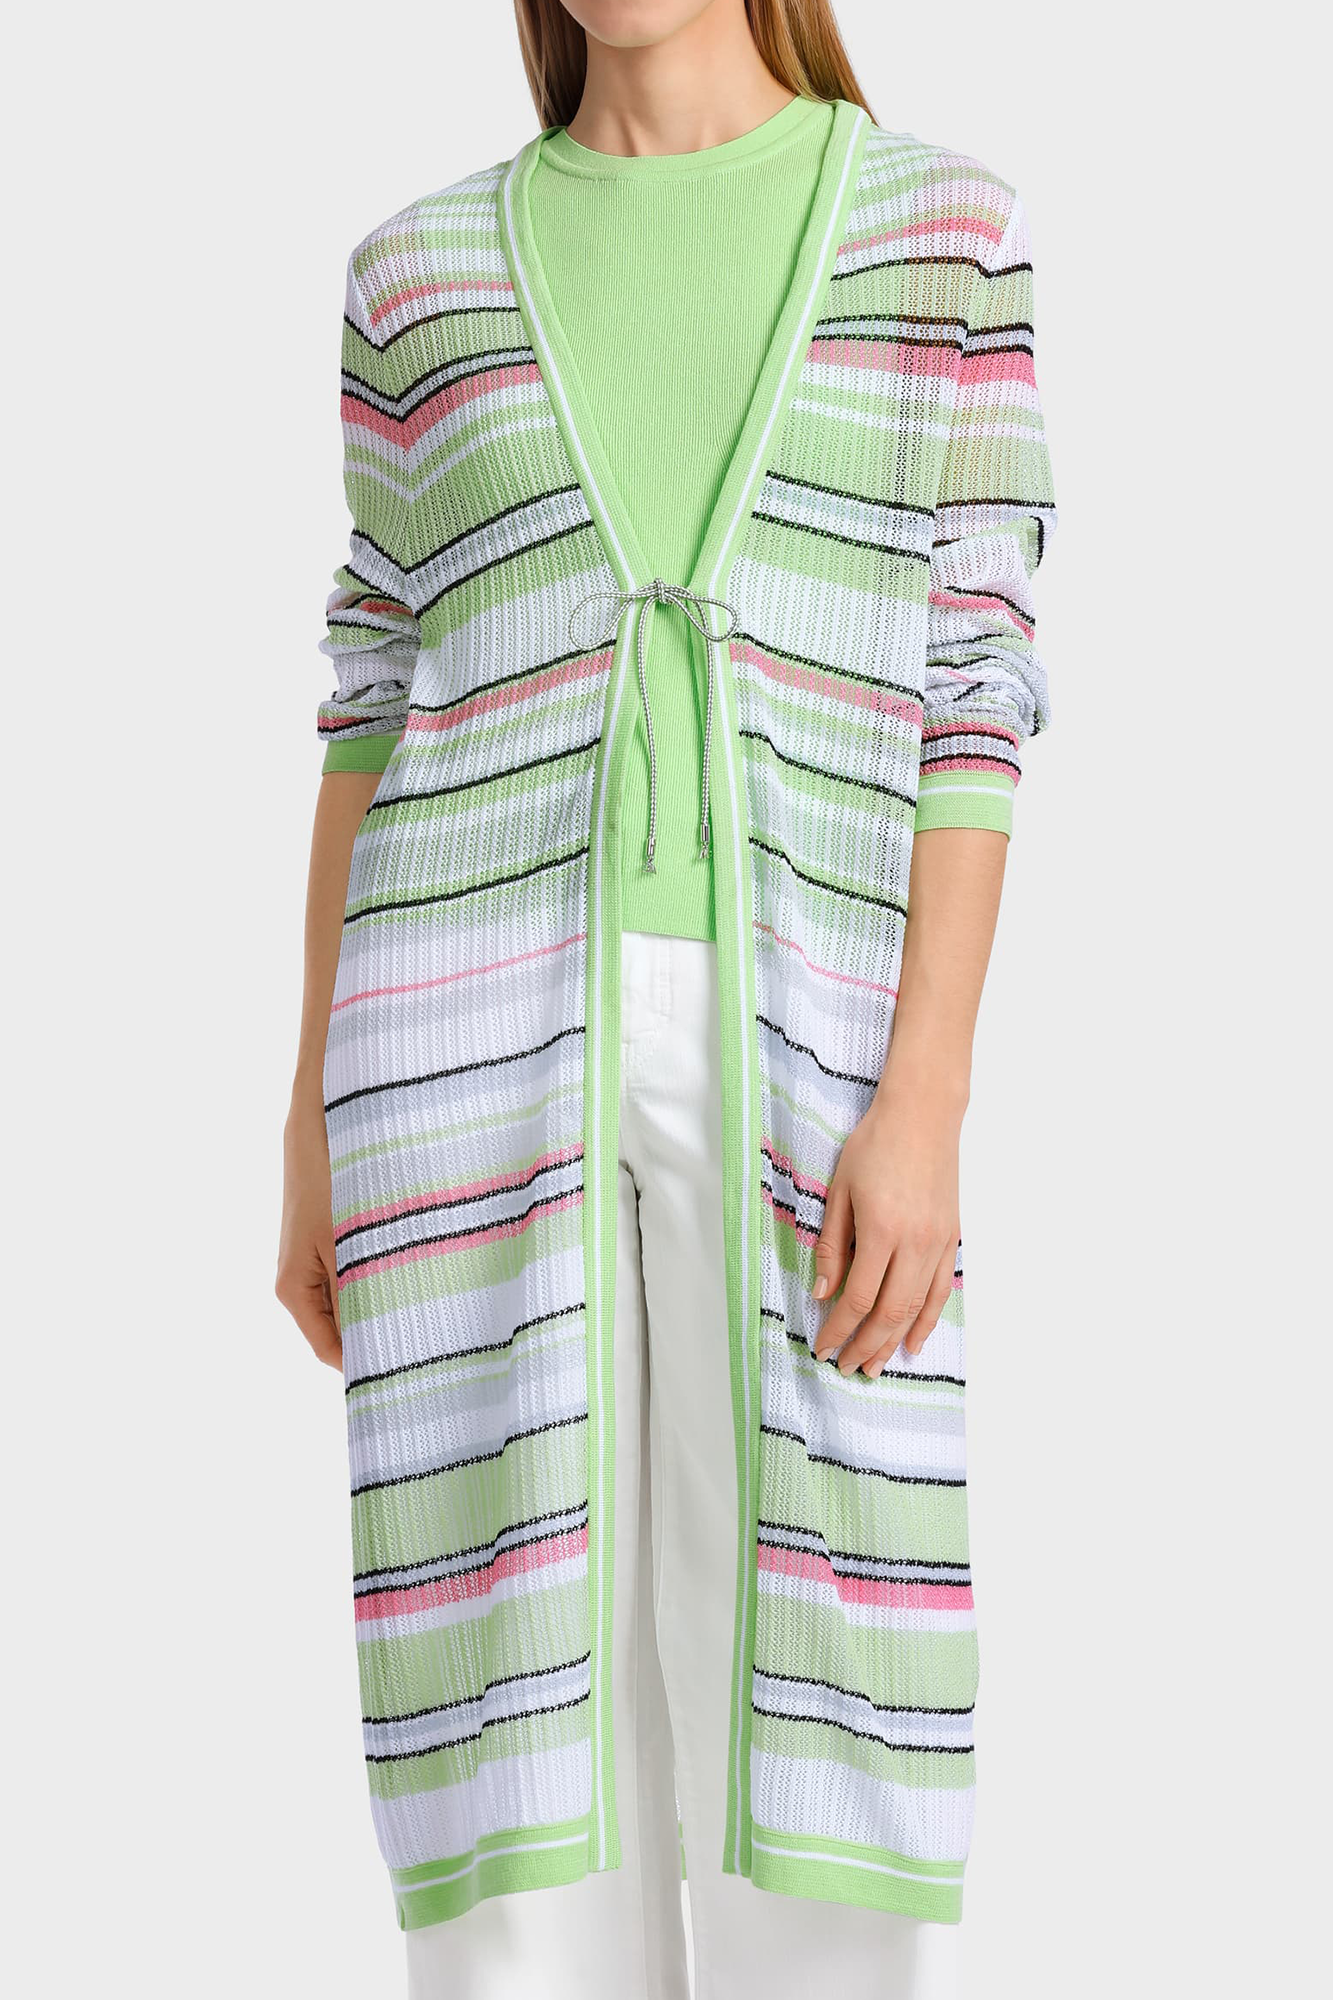 Beach House Long Cardigan Knitted in Germany Light Apple Green